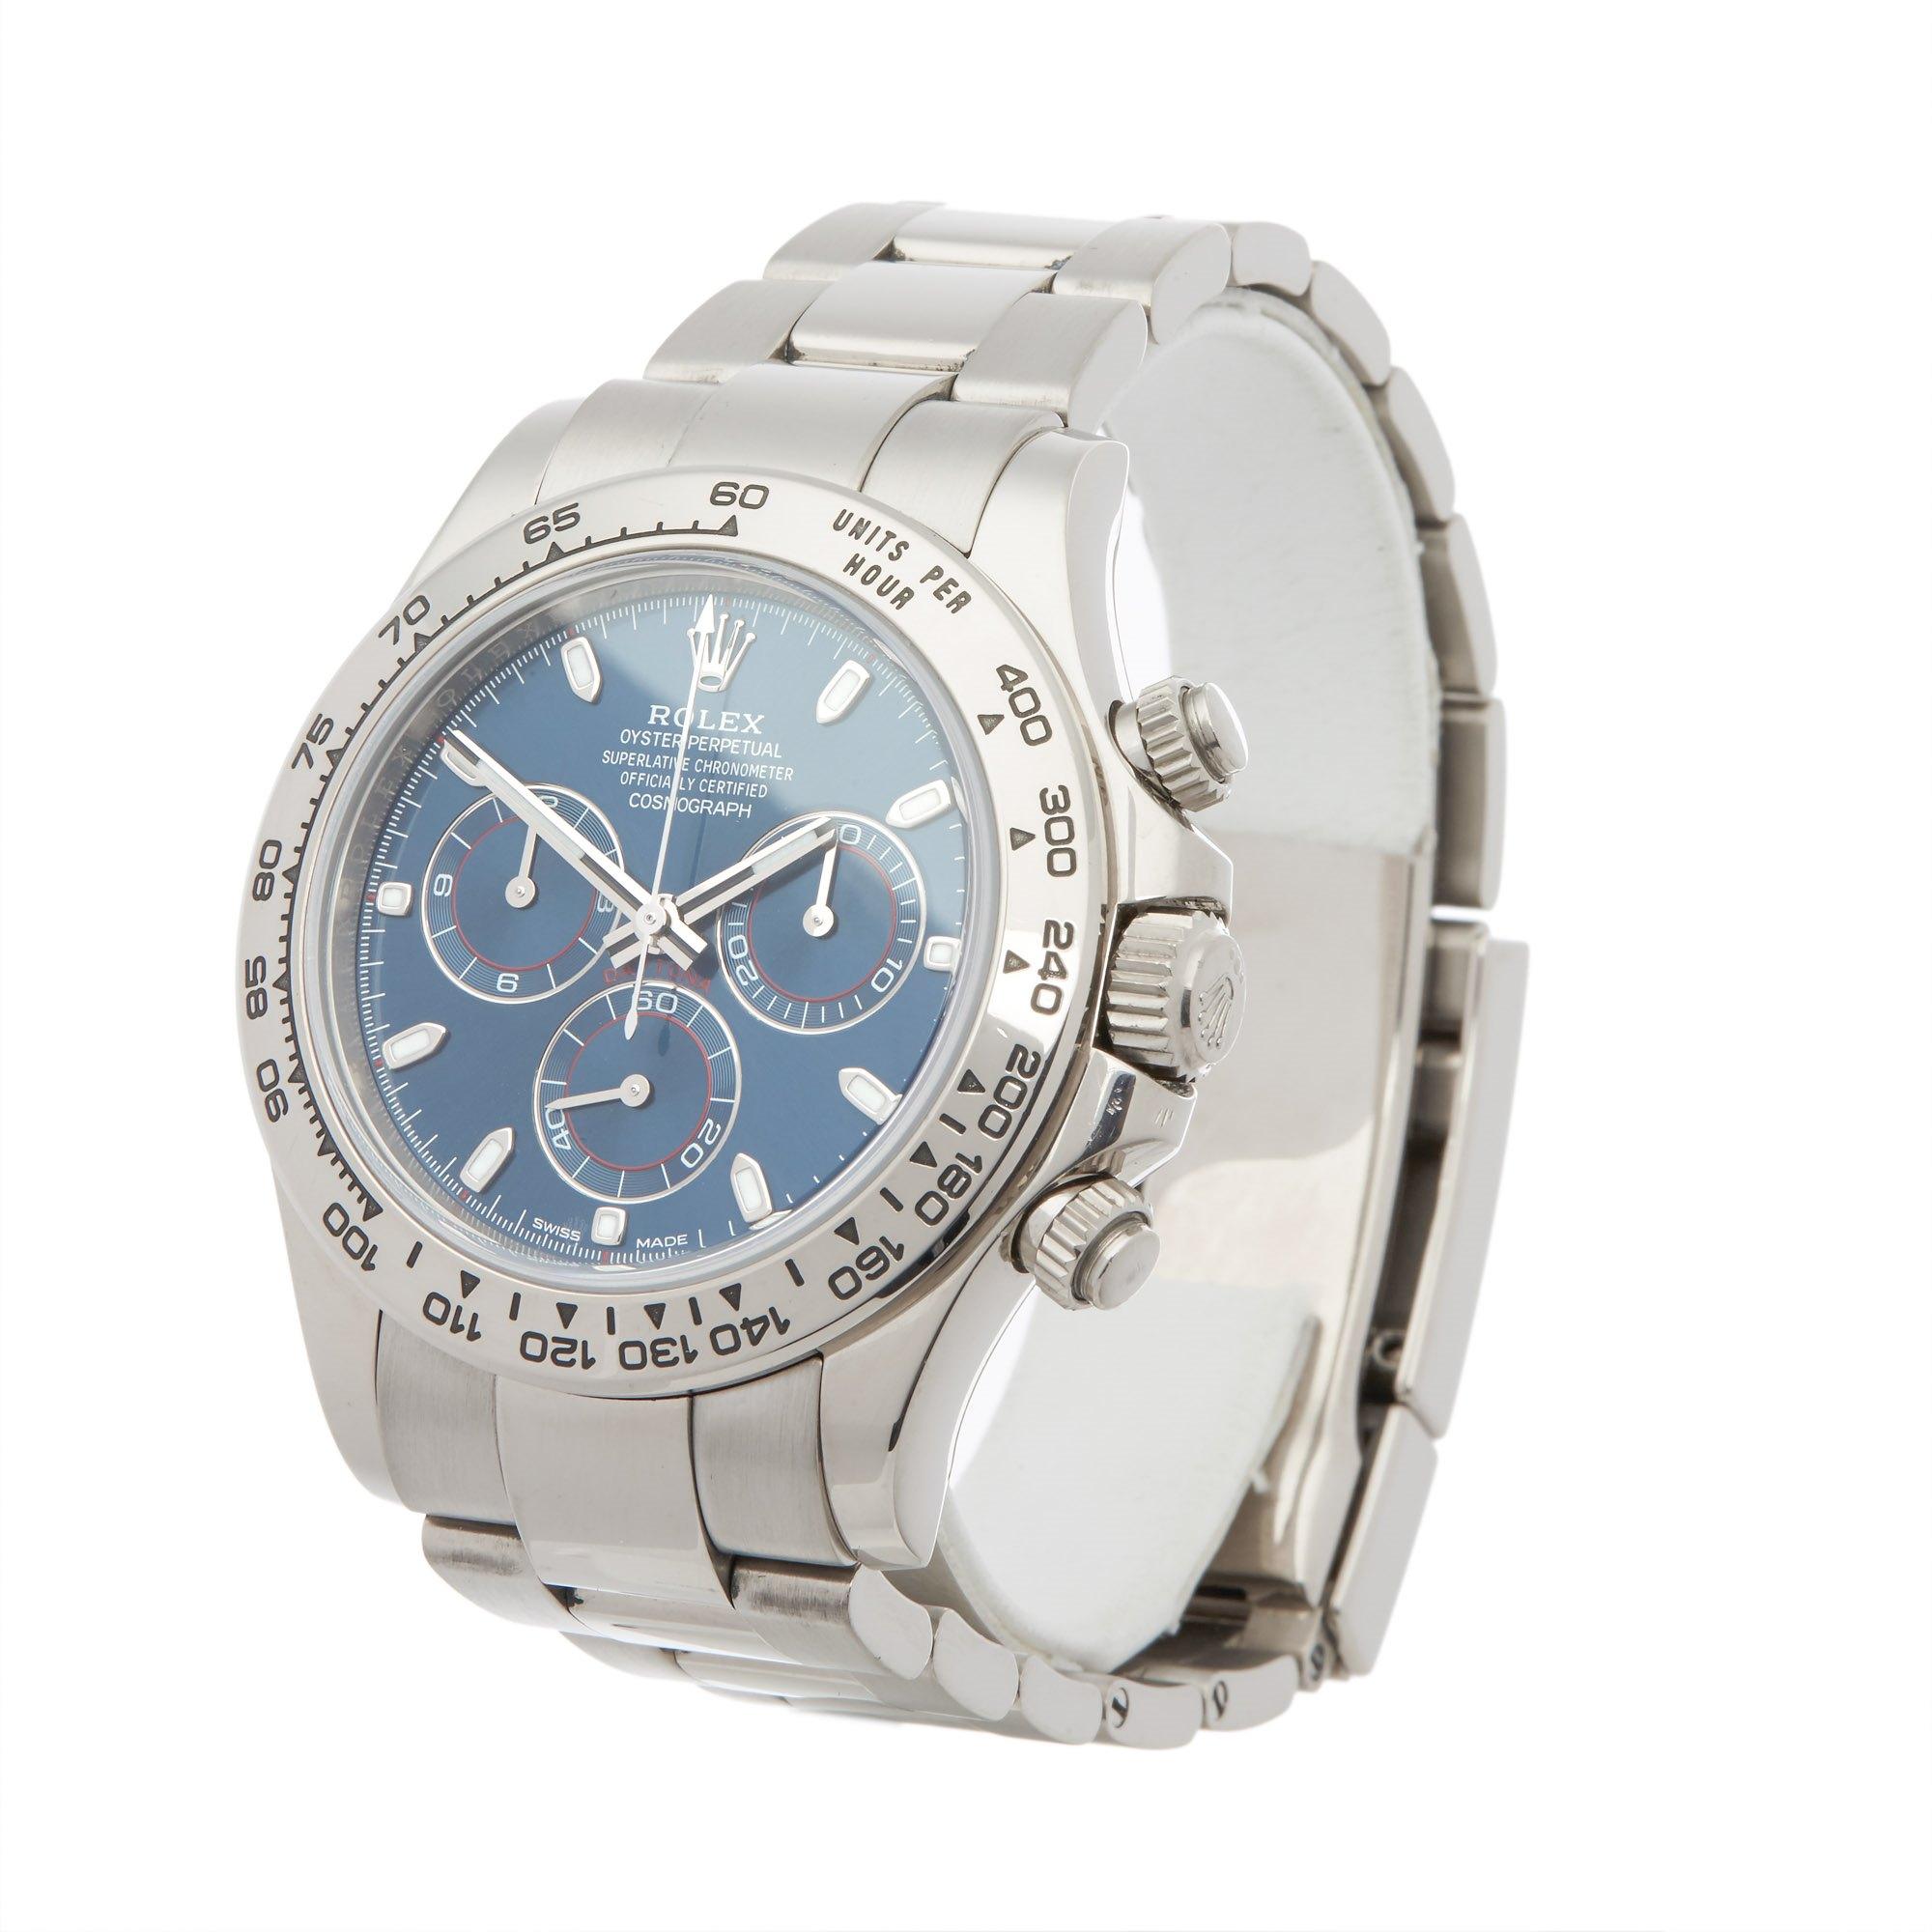 Xupes Reference: W007328
Manufacturer: Rolex
Model: Daytona
Model Variant: 
Model Number: 116509
Age: 17-06-2016
Gender: Men
Complete With: Rolex Box, Manuals, Swing Tags & Guarantee
Dial: Blue Baton
Glass: Sapphire Crystal
Case Size: 40mm
Case